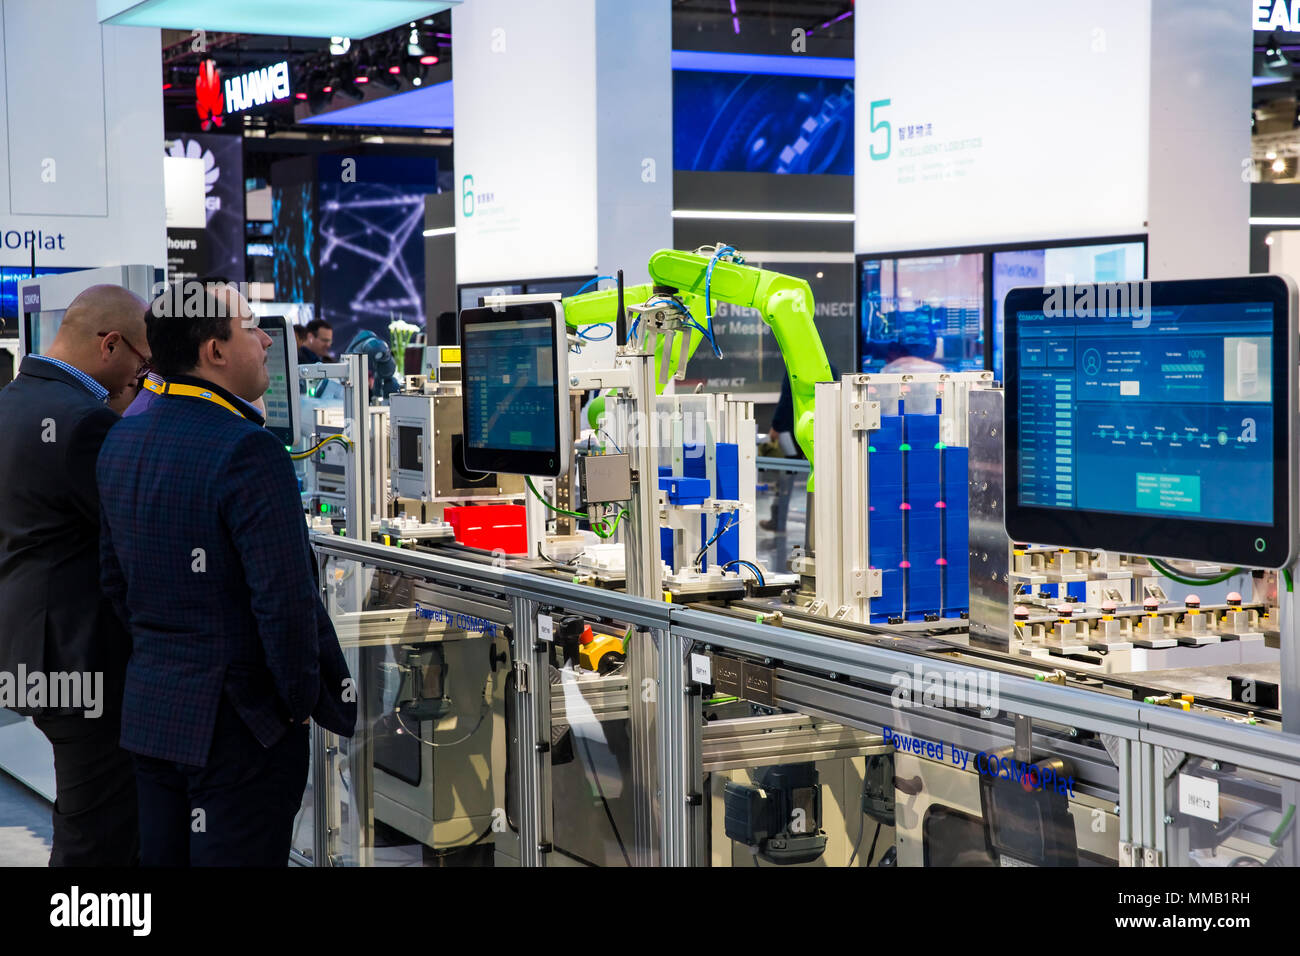 Hannover, Germany - April, 2018: Industrial assembly line with robots powerded by COSMOPlat on Messe fair in Hannover, Germany Stock Photo